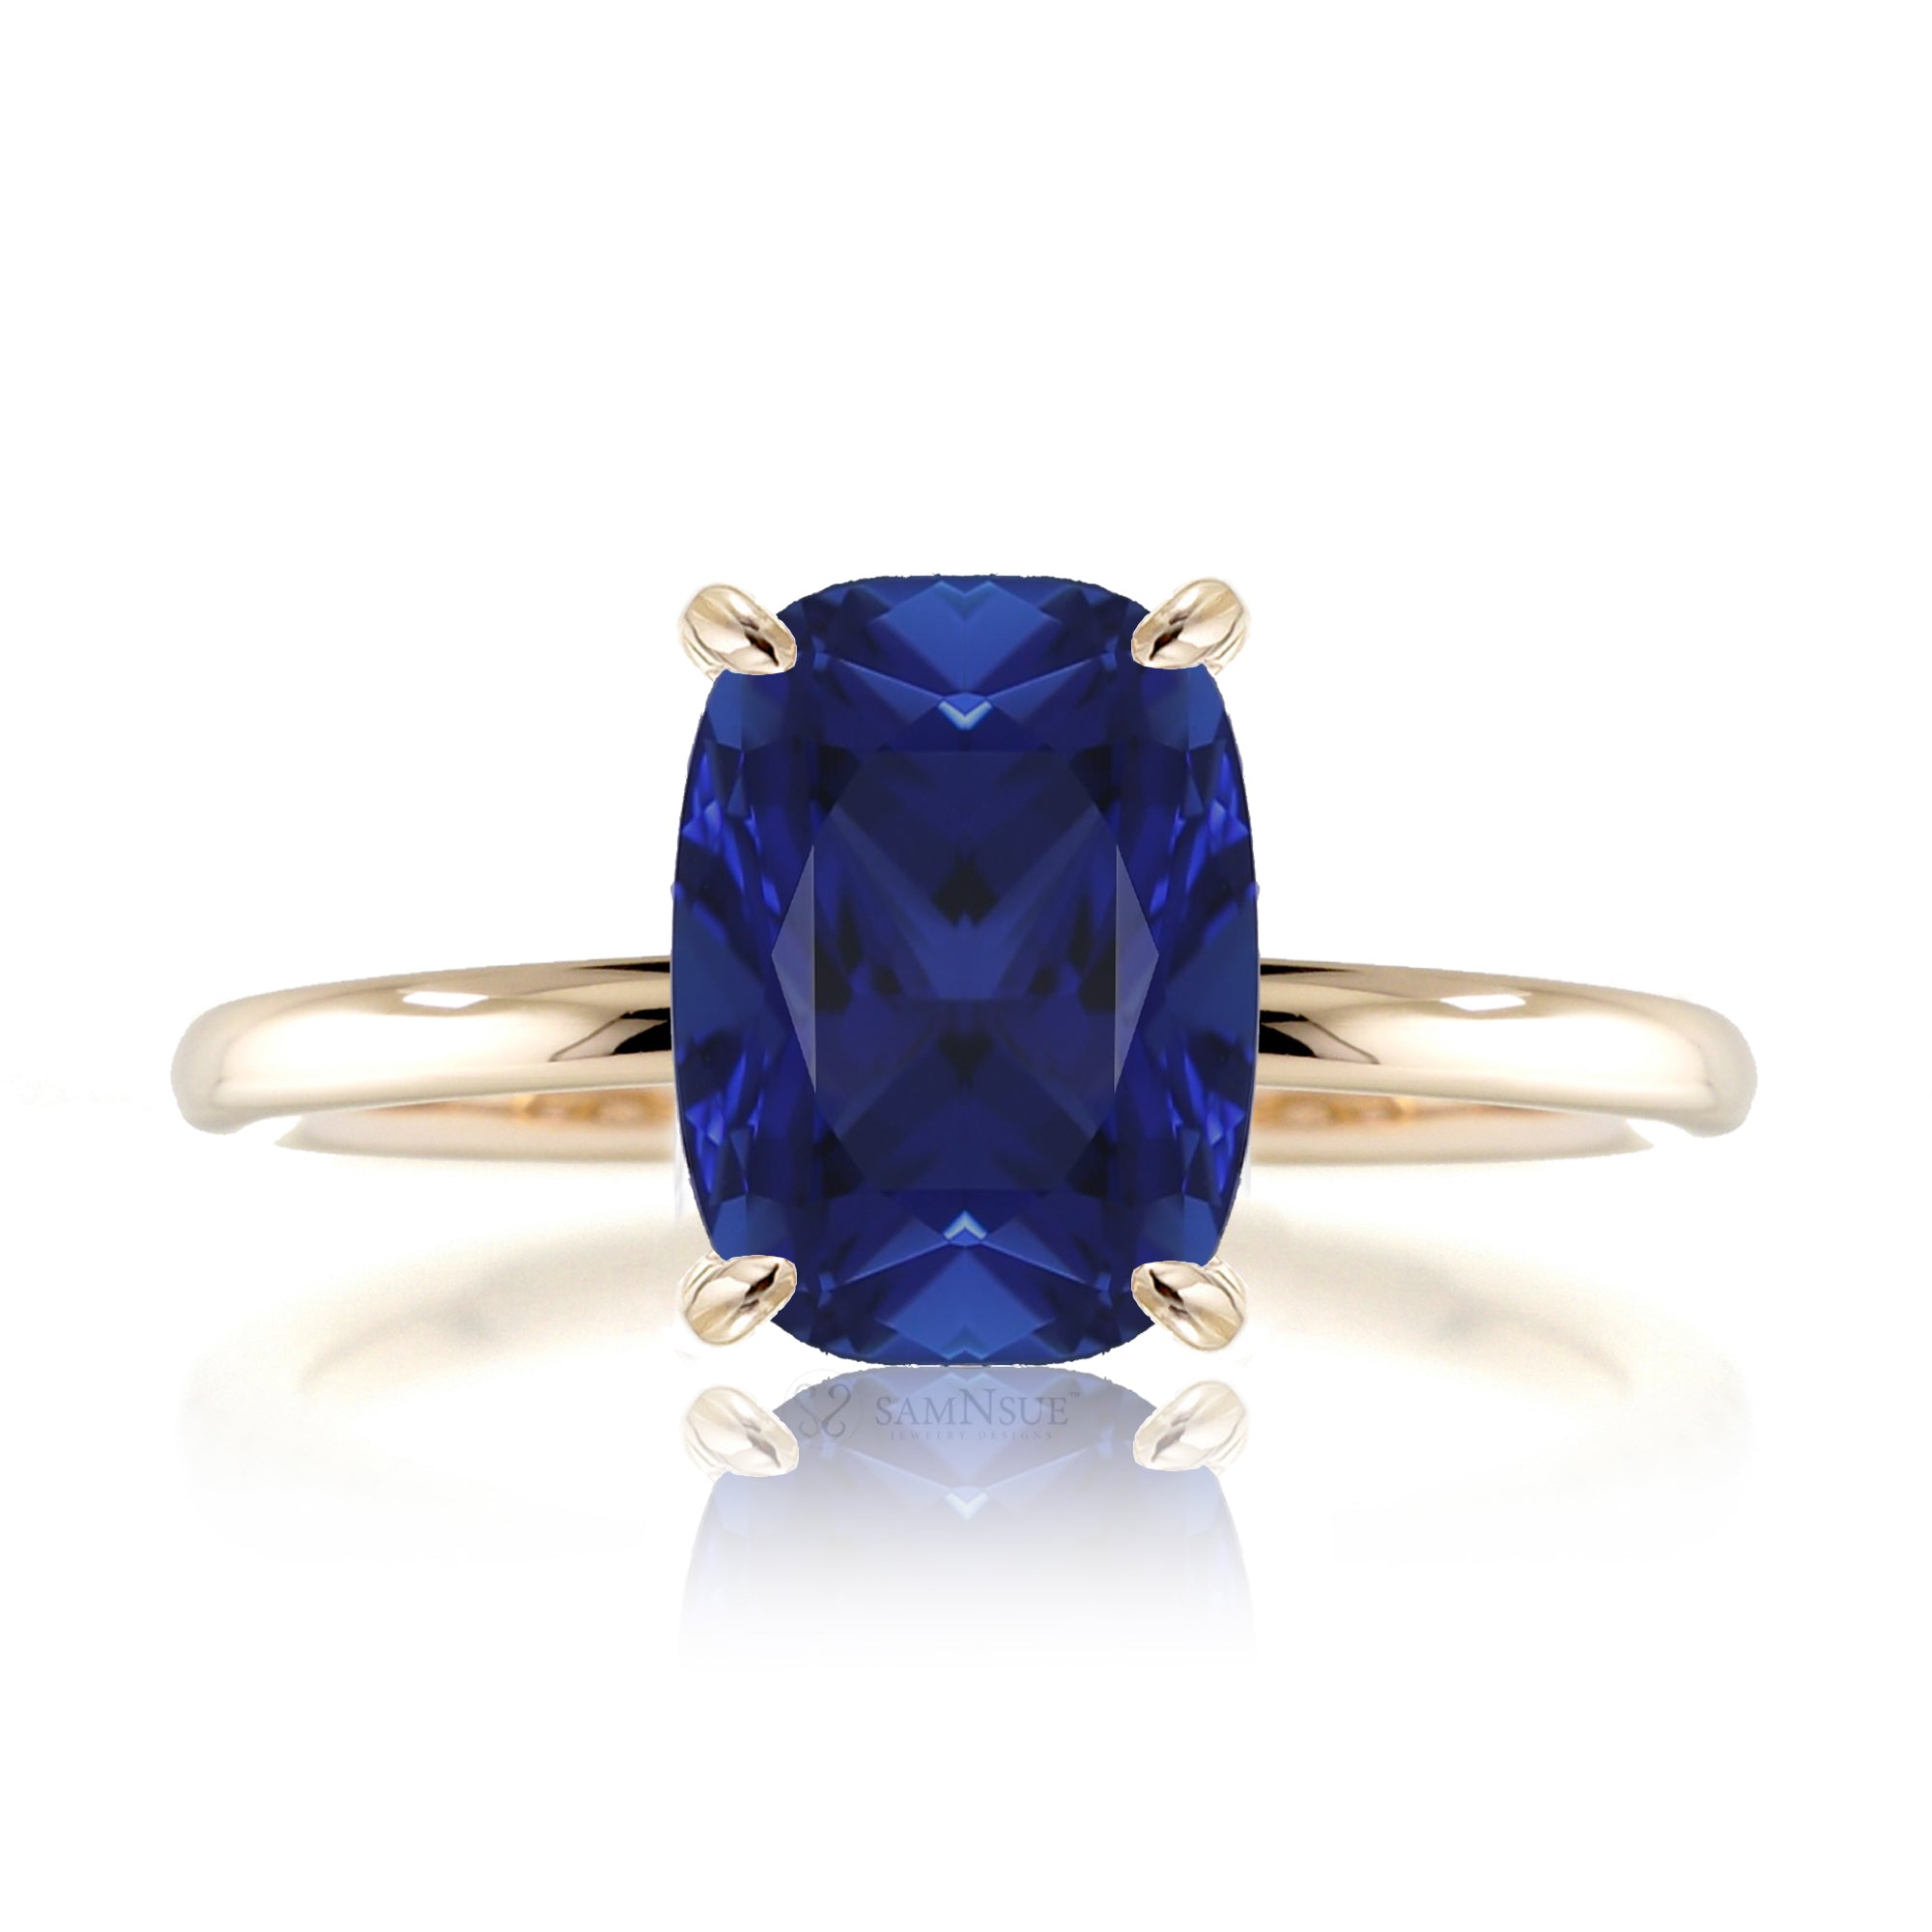 Cushion cut blue sapphire solid band engagement ring yellow gold - the Ava